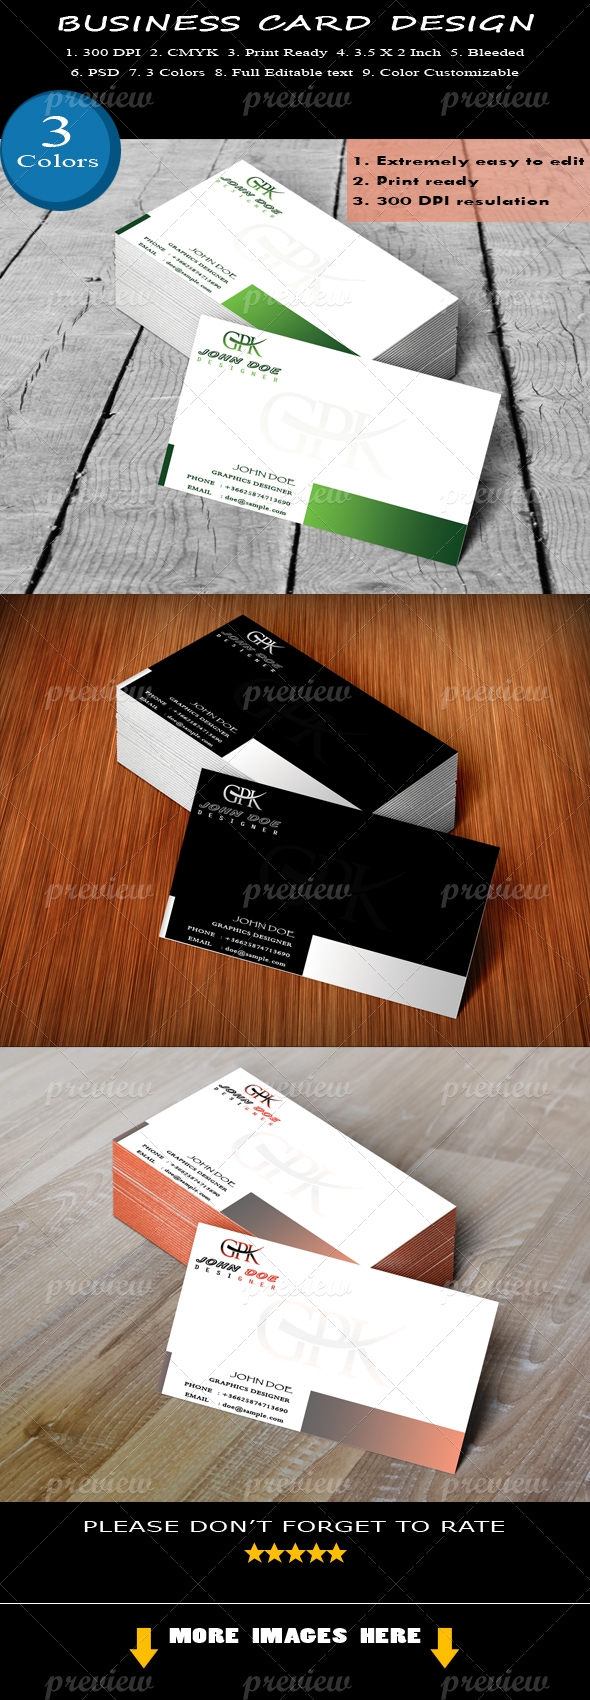 Amazing Business Card